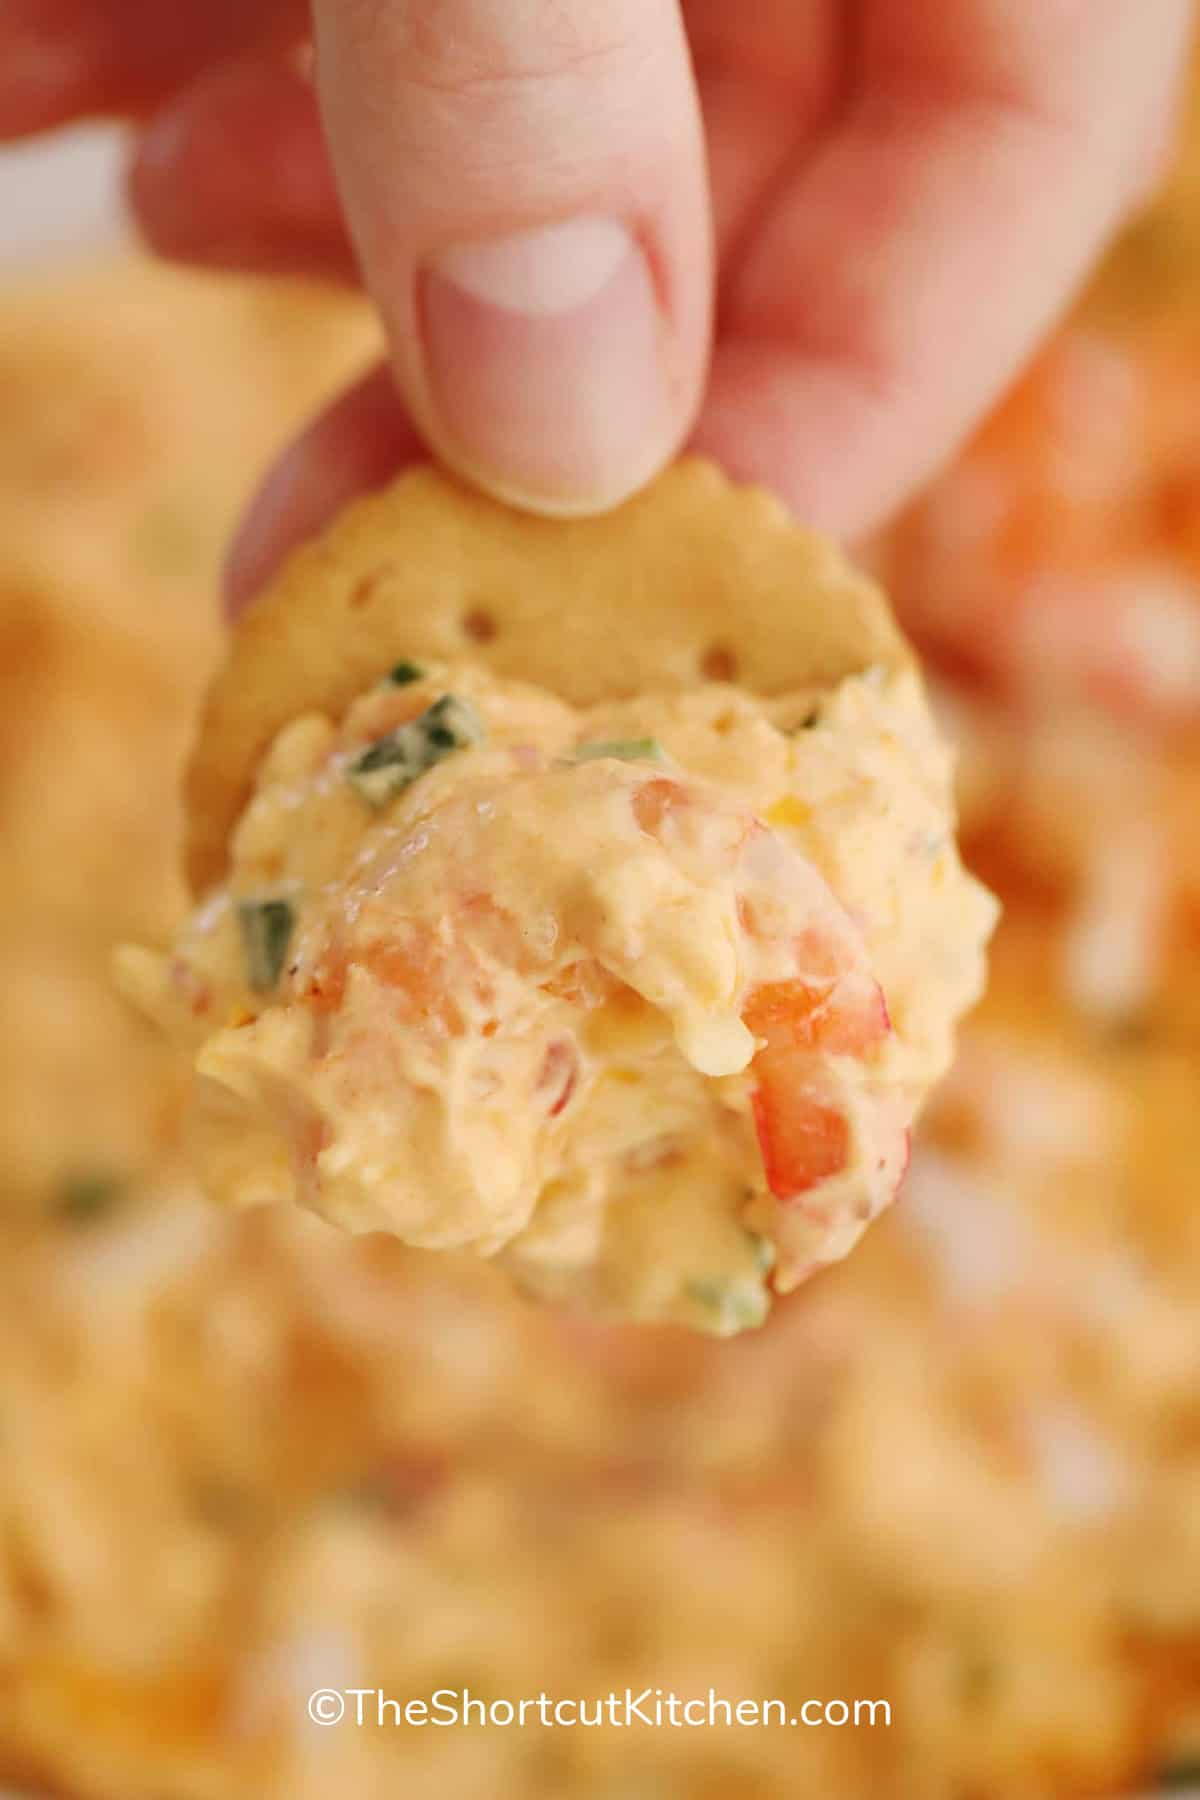 A cracker with shrimp dip on it being held.